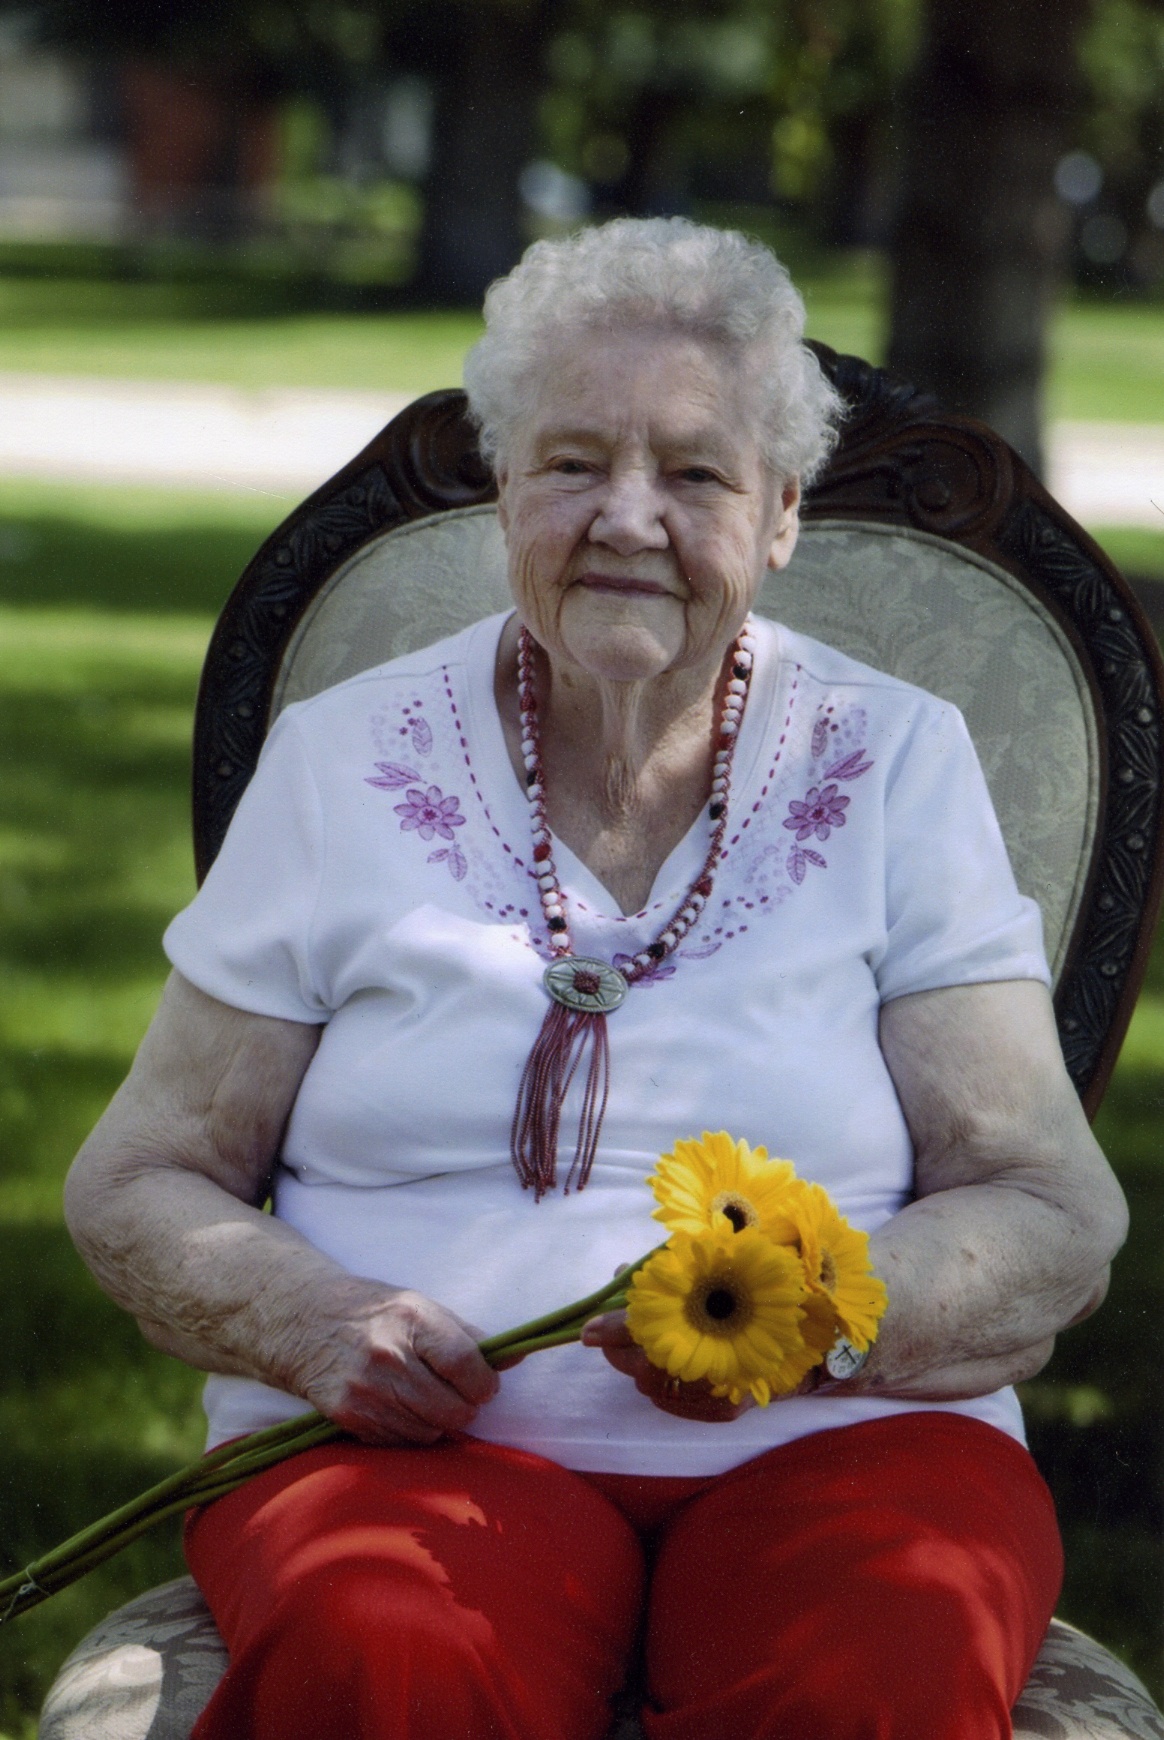 FULL LIFE – Red Deer’s Edith Hudson enjoys some time outside in the warm weather. She marked her 102nd birthday this past year – the same year Red Deer celebrates its 100th anniversary of gaining city status.